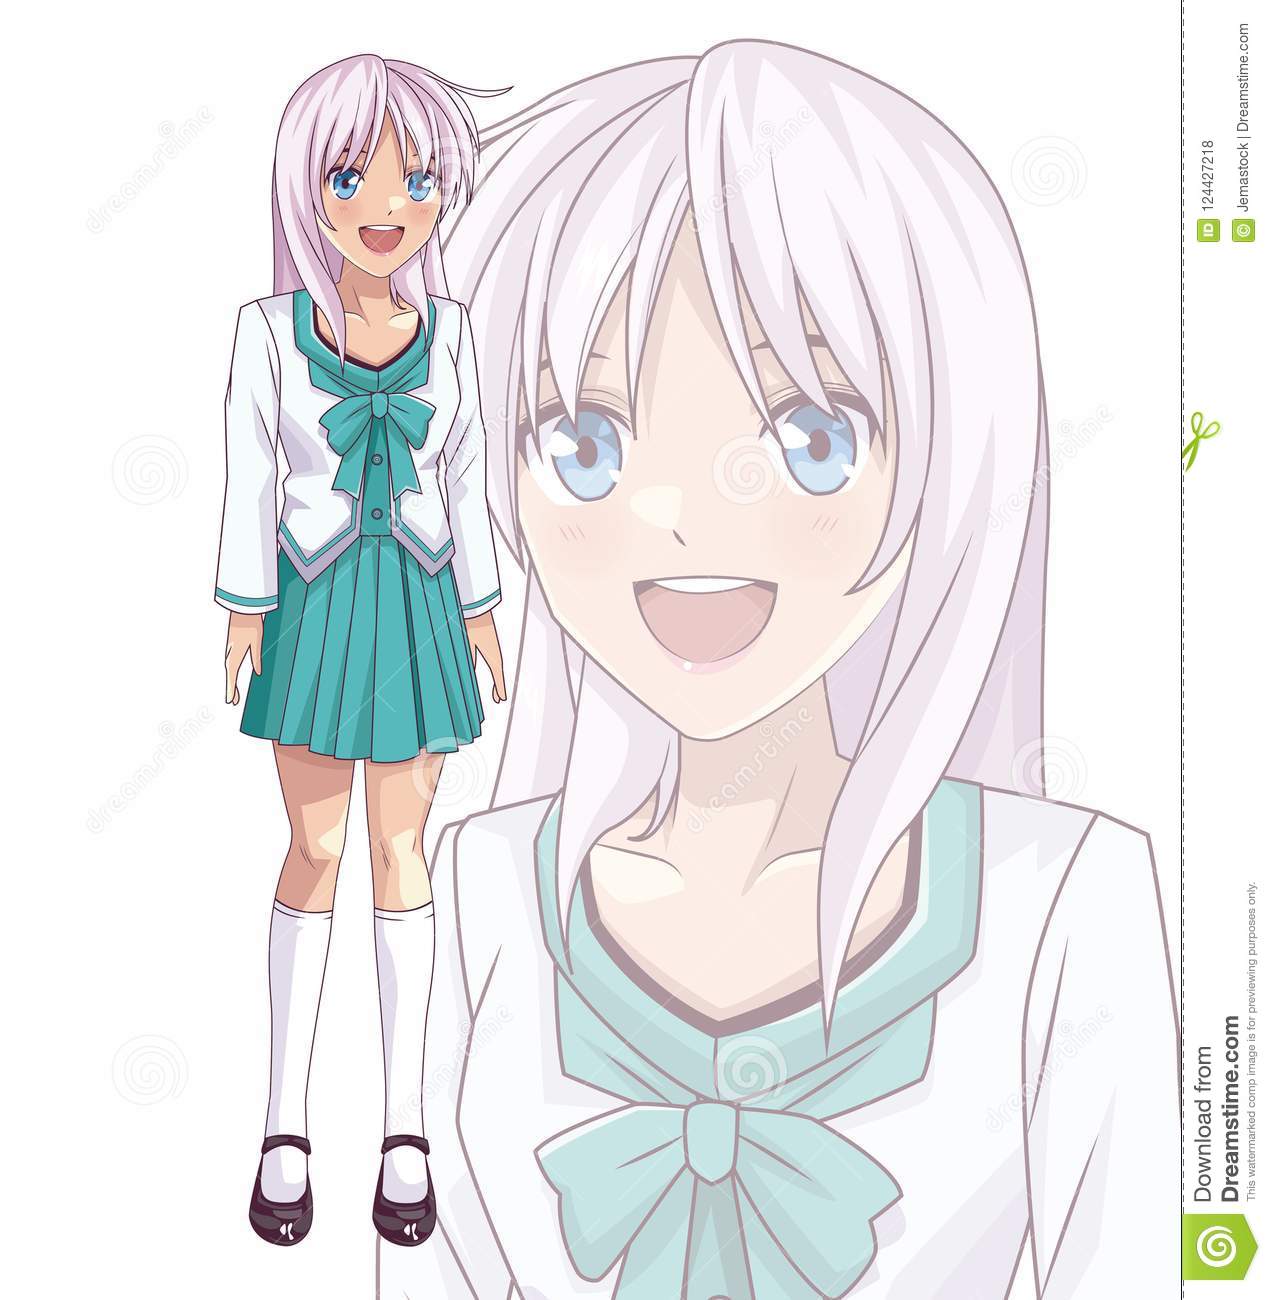 Young Anime School Student Woman Stock Vector ...